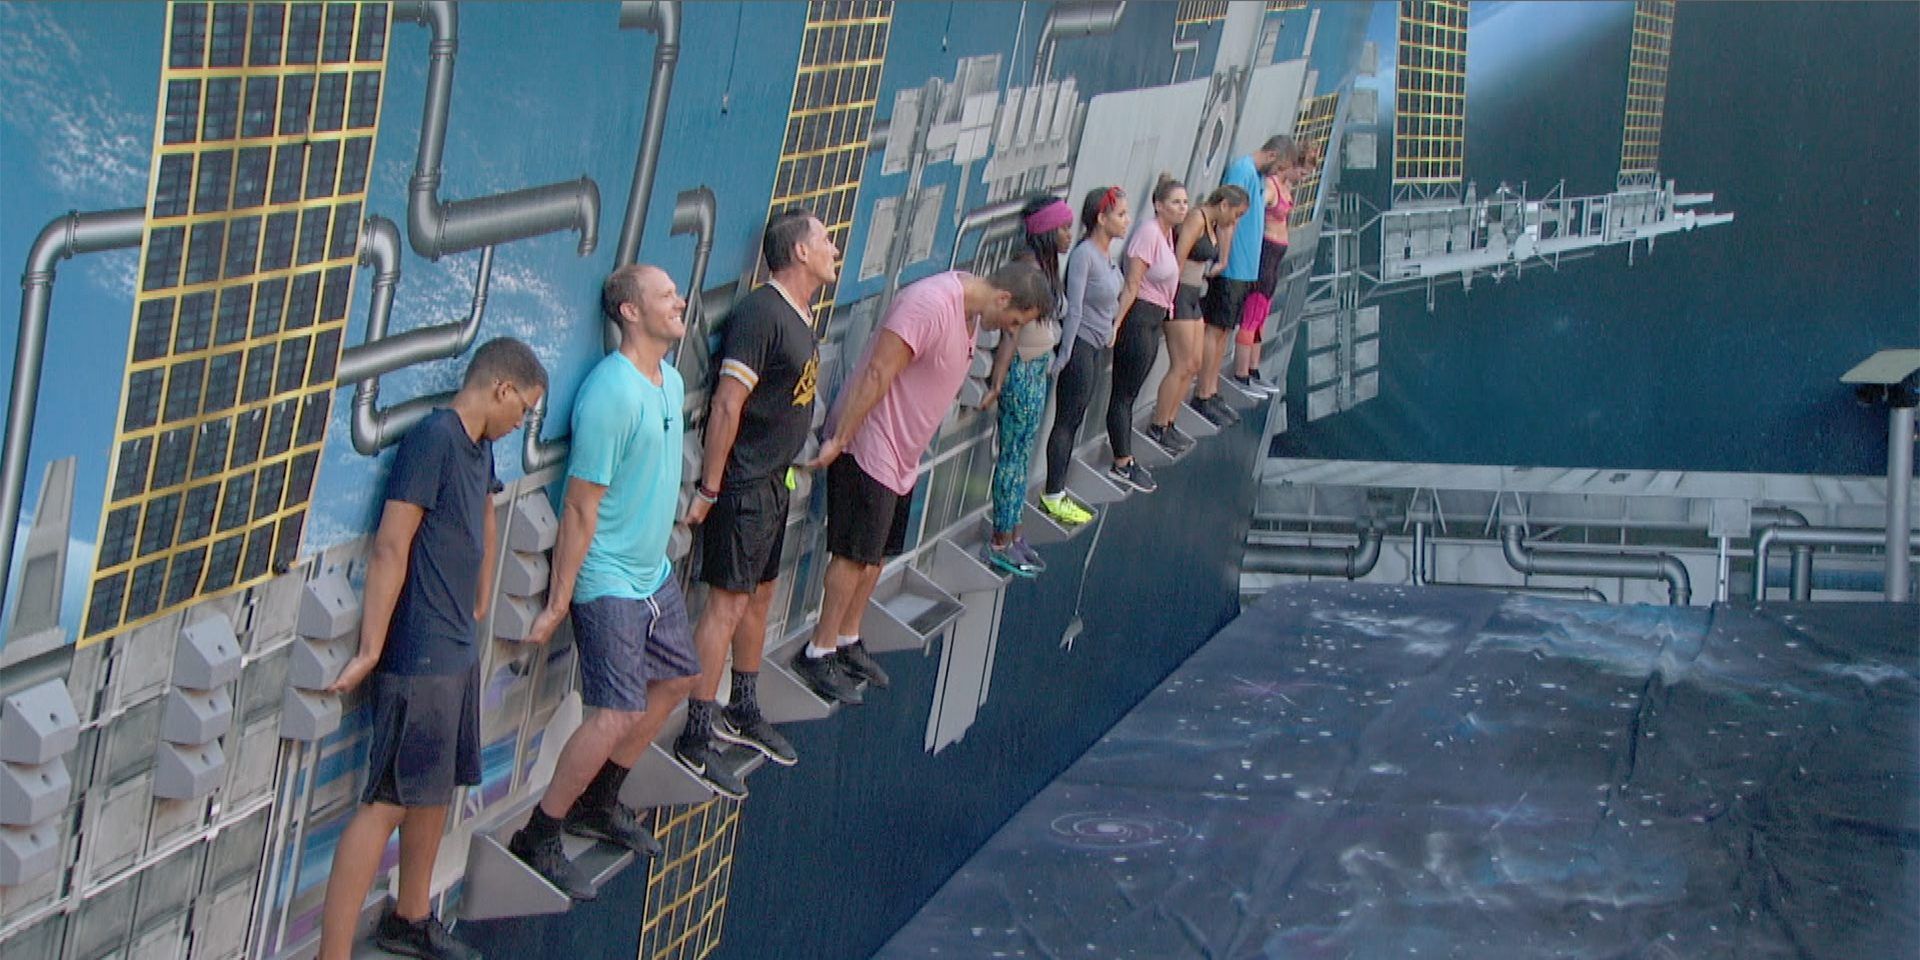 Big Brother The 10 Best HOH Competitions, Ranked